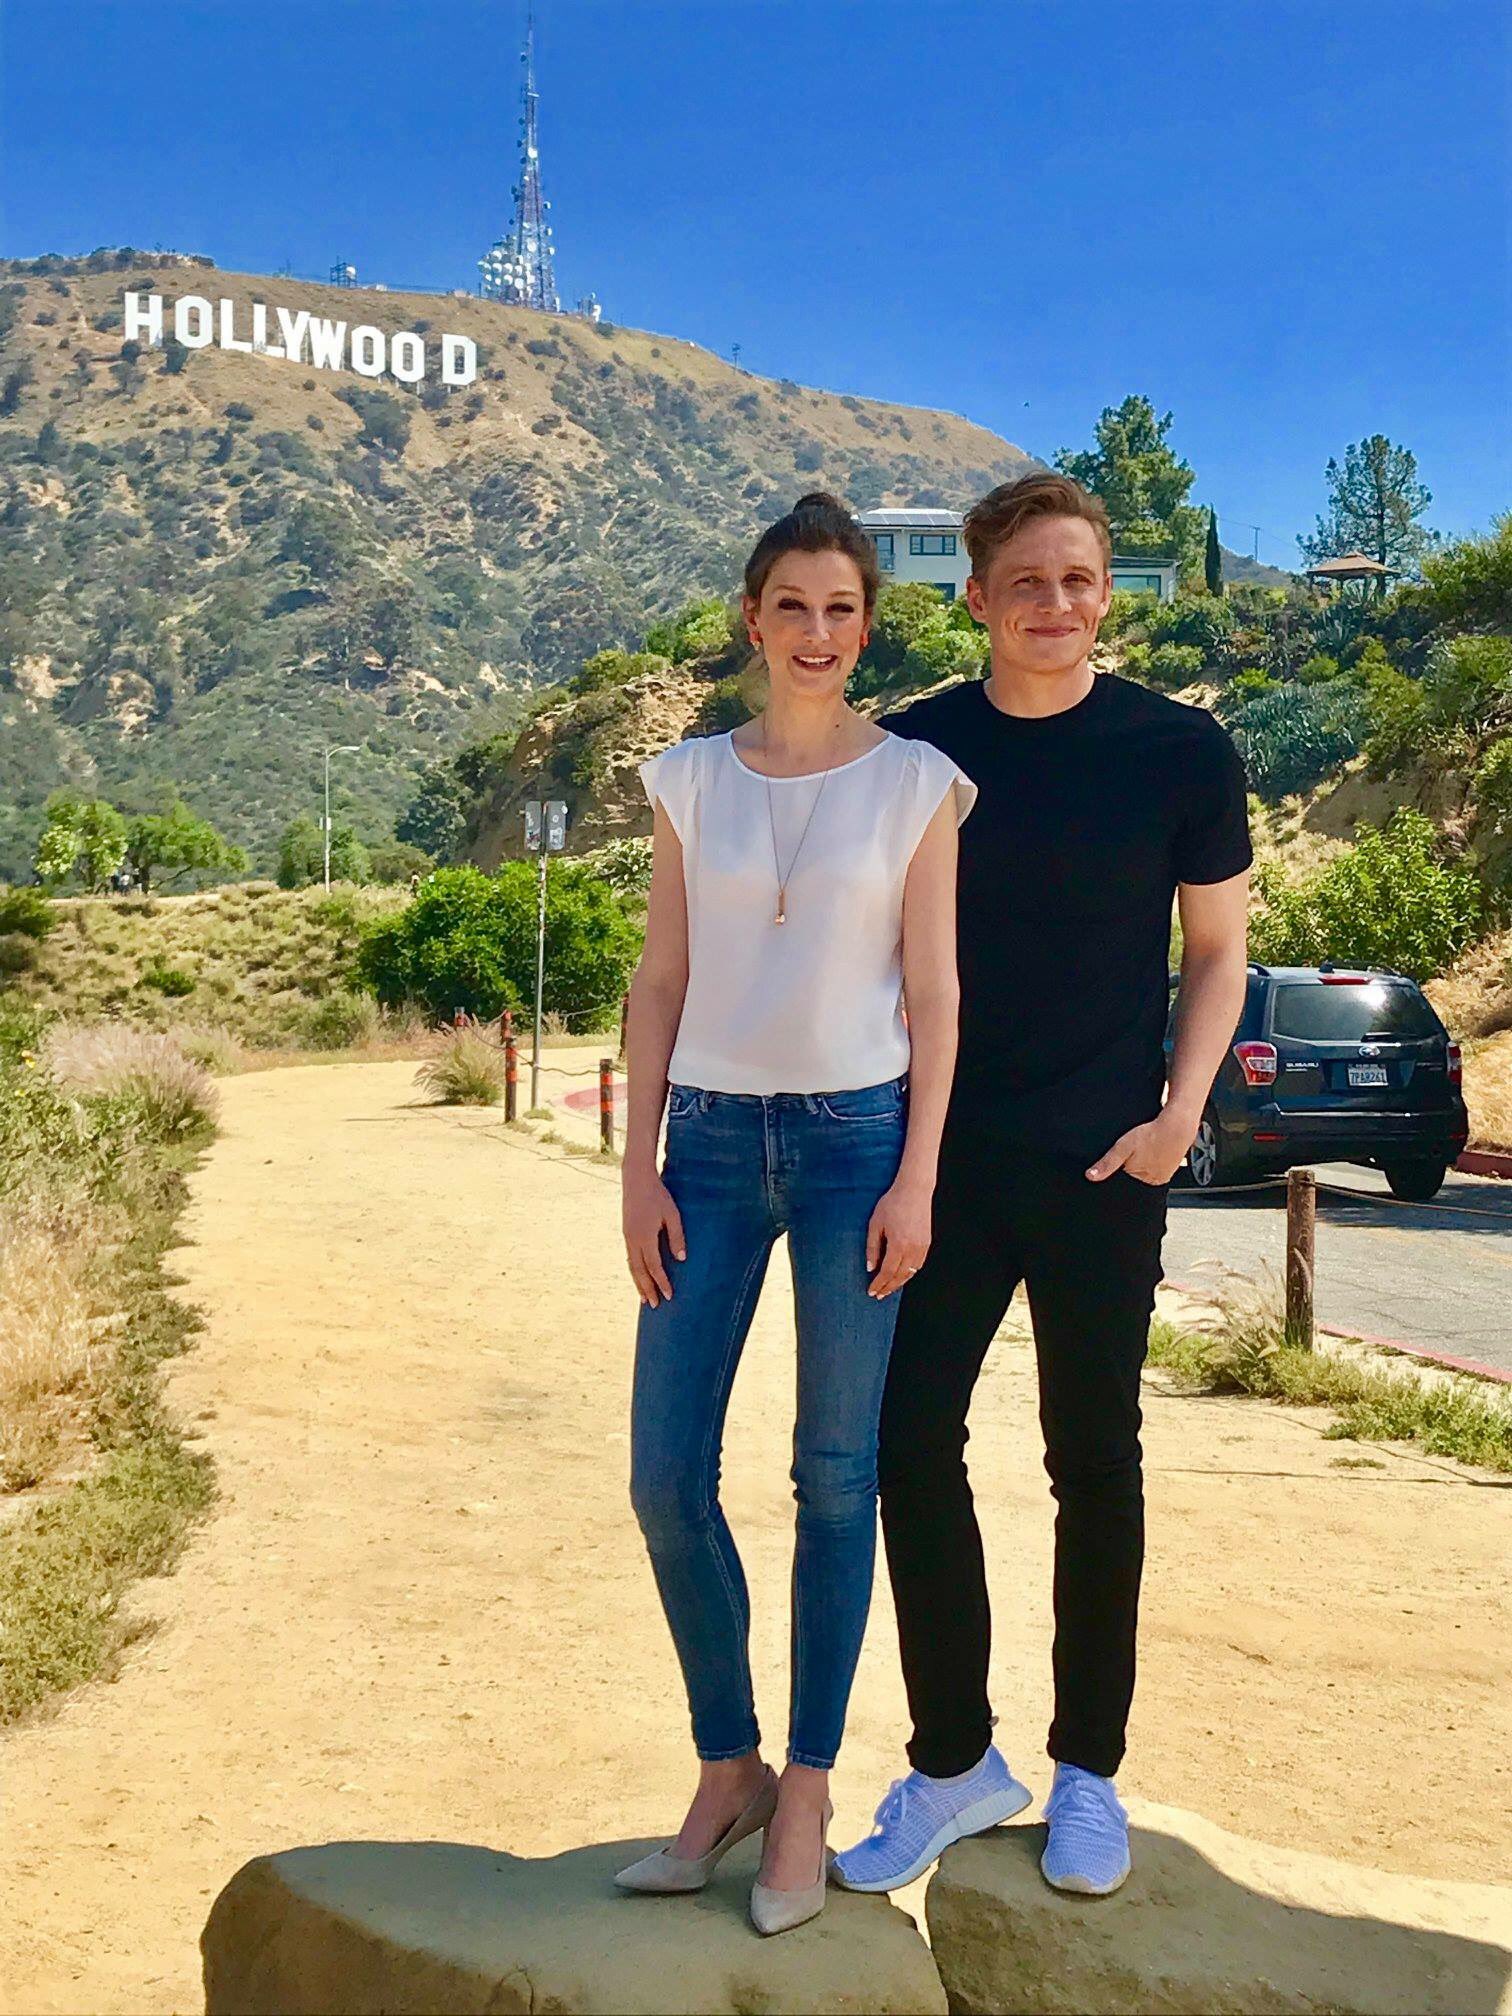 White Bear Pr Alexandra Maria Lara And Matthias Schweighofer Are In La For The Premiere Of Their Amazon Series Youarewanted